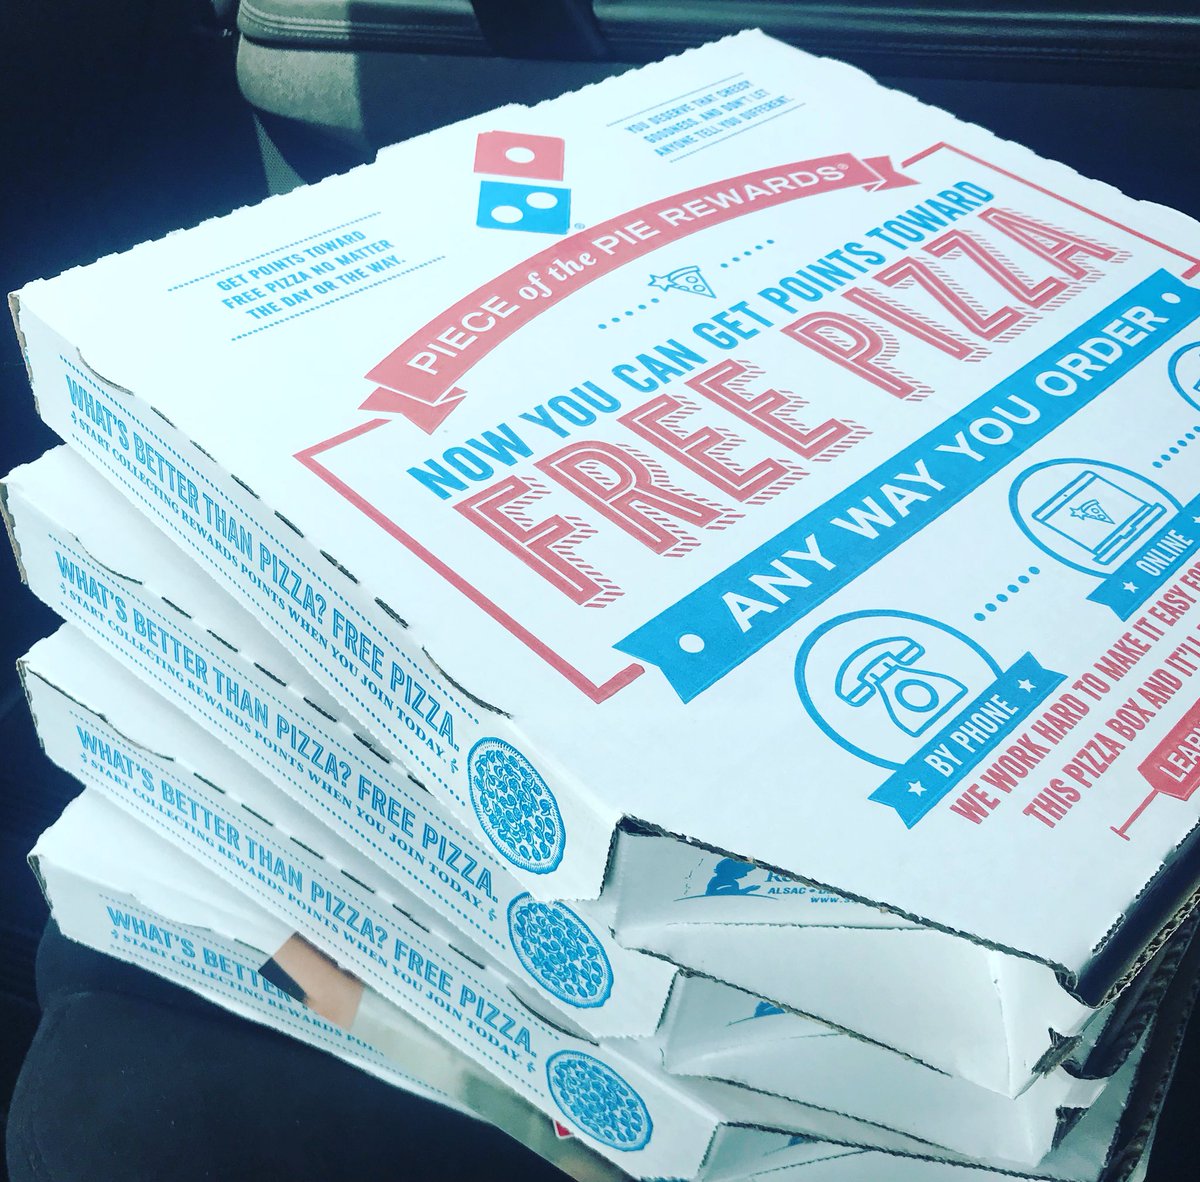 Just popping by to surprise some friends on their moving day. We love our clients! 🍕🍕🍕🍕
#hopkinsrealestate #remaxcommunity #remaxhustle #heretoserve #lynchburgrealtor #lynchburg #centralvirginia #realtorlife #lynchburgrealestate #realestate  #lynchburgfamily  #lynchburghome